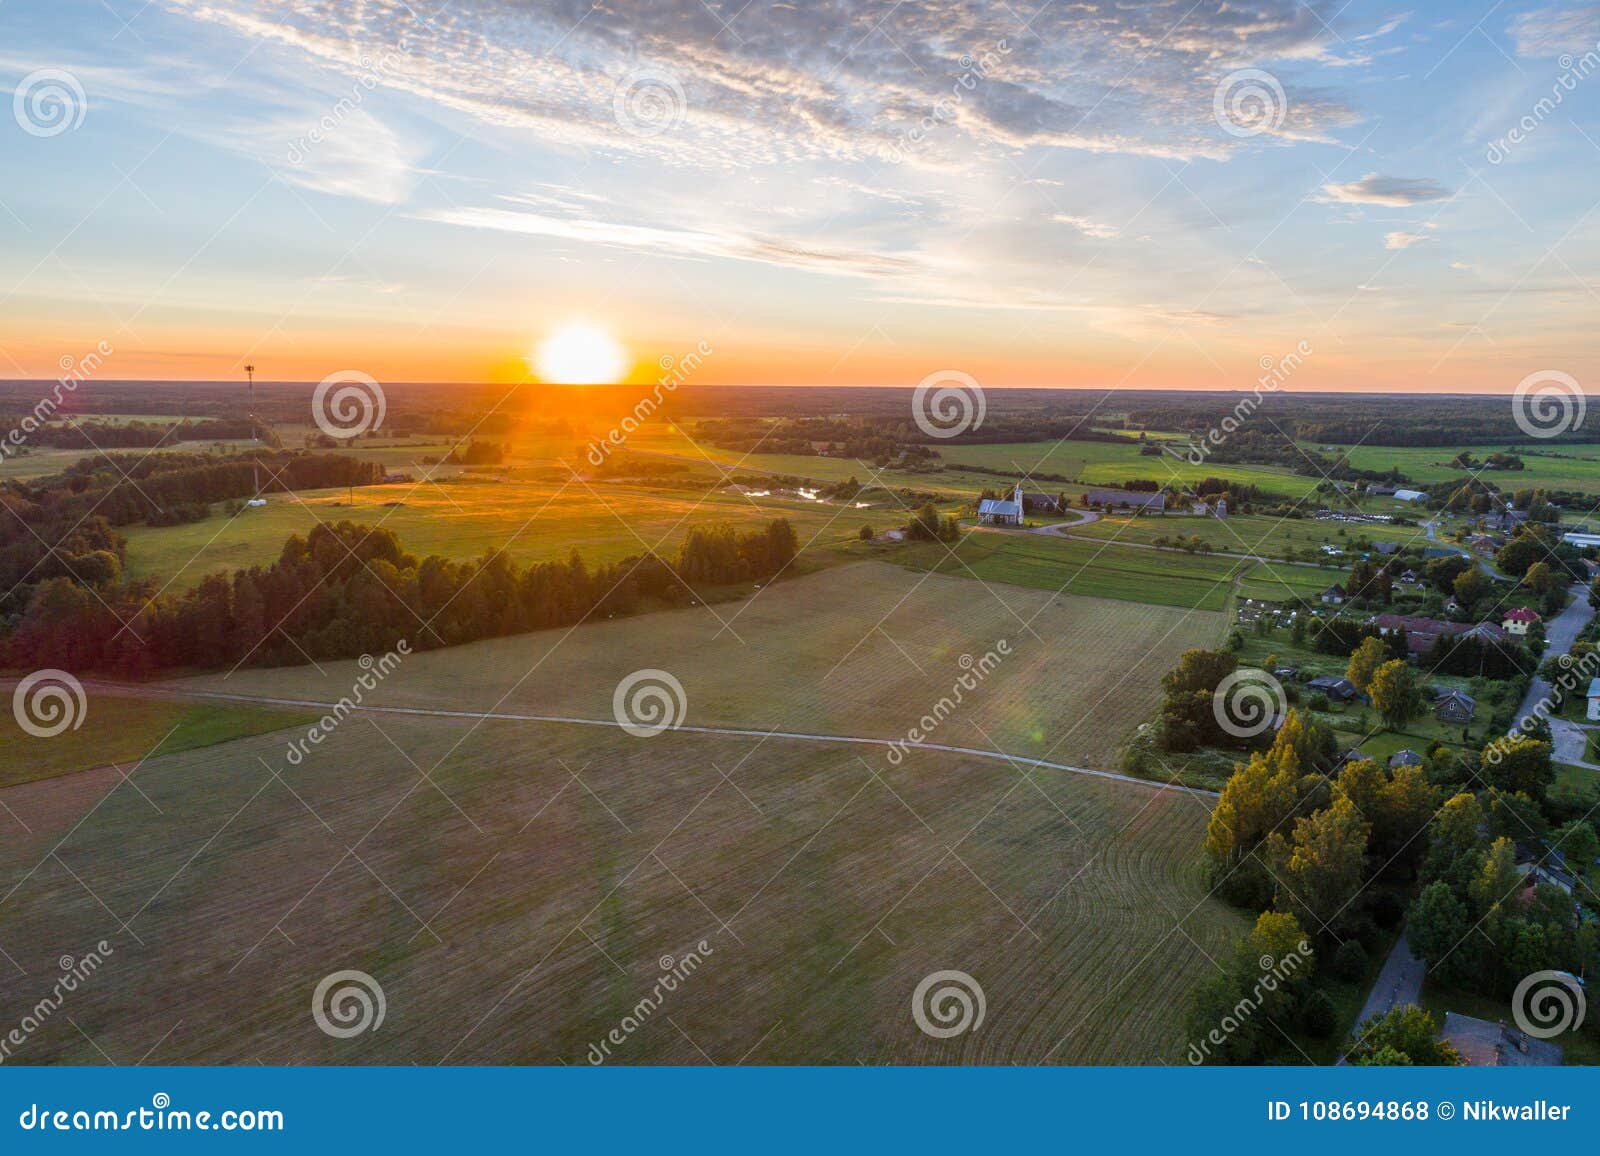 Beautiful Sunset Over the Small Town. Fields and Trees Around. Aerial ...